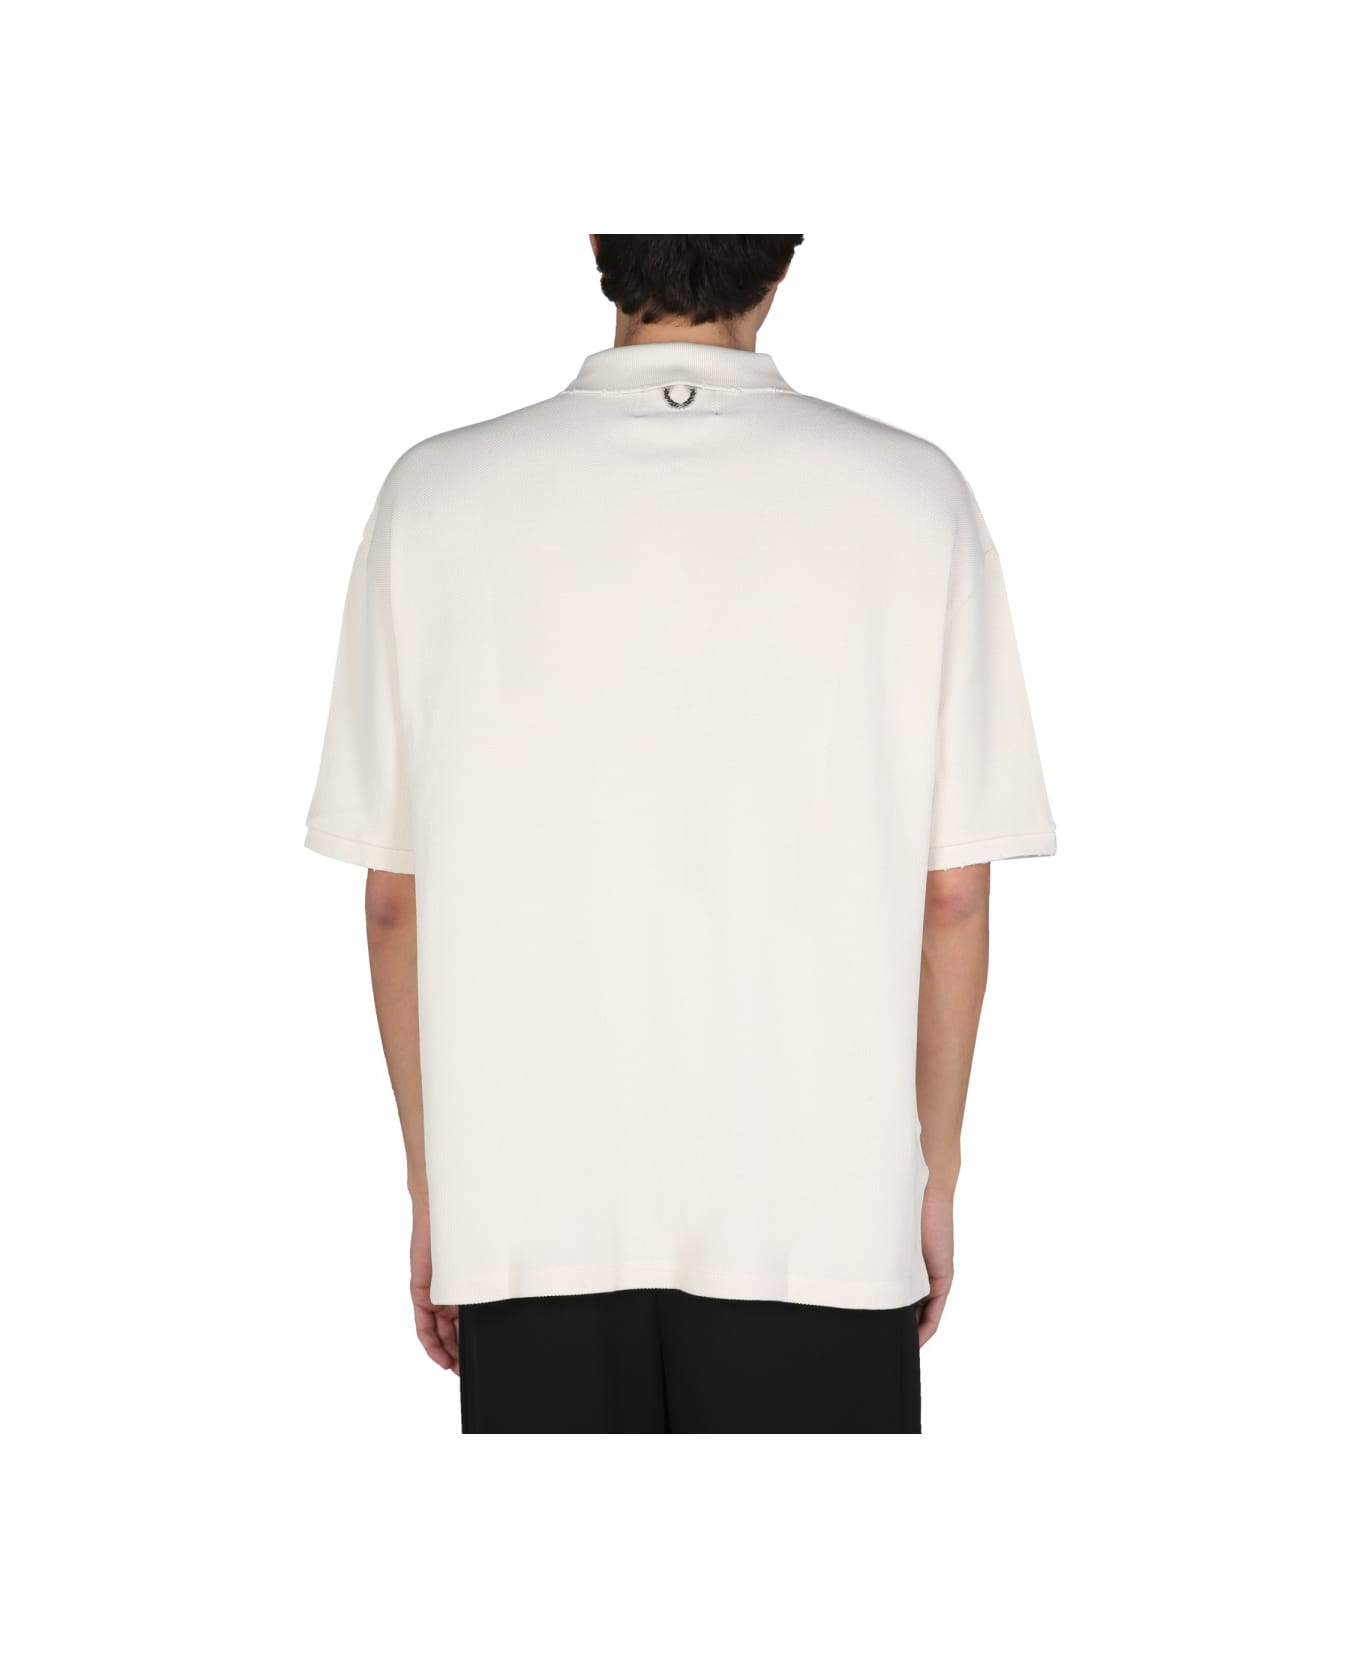 Fred Perry by Raf Simons Distressed Oversized Polo Shirt - POWDER